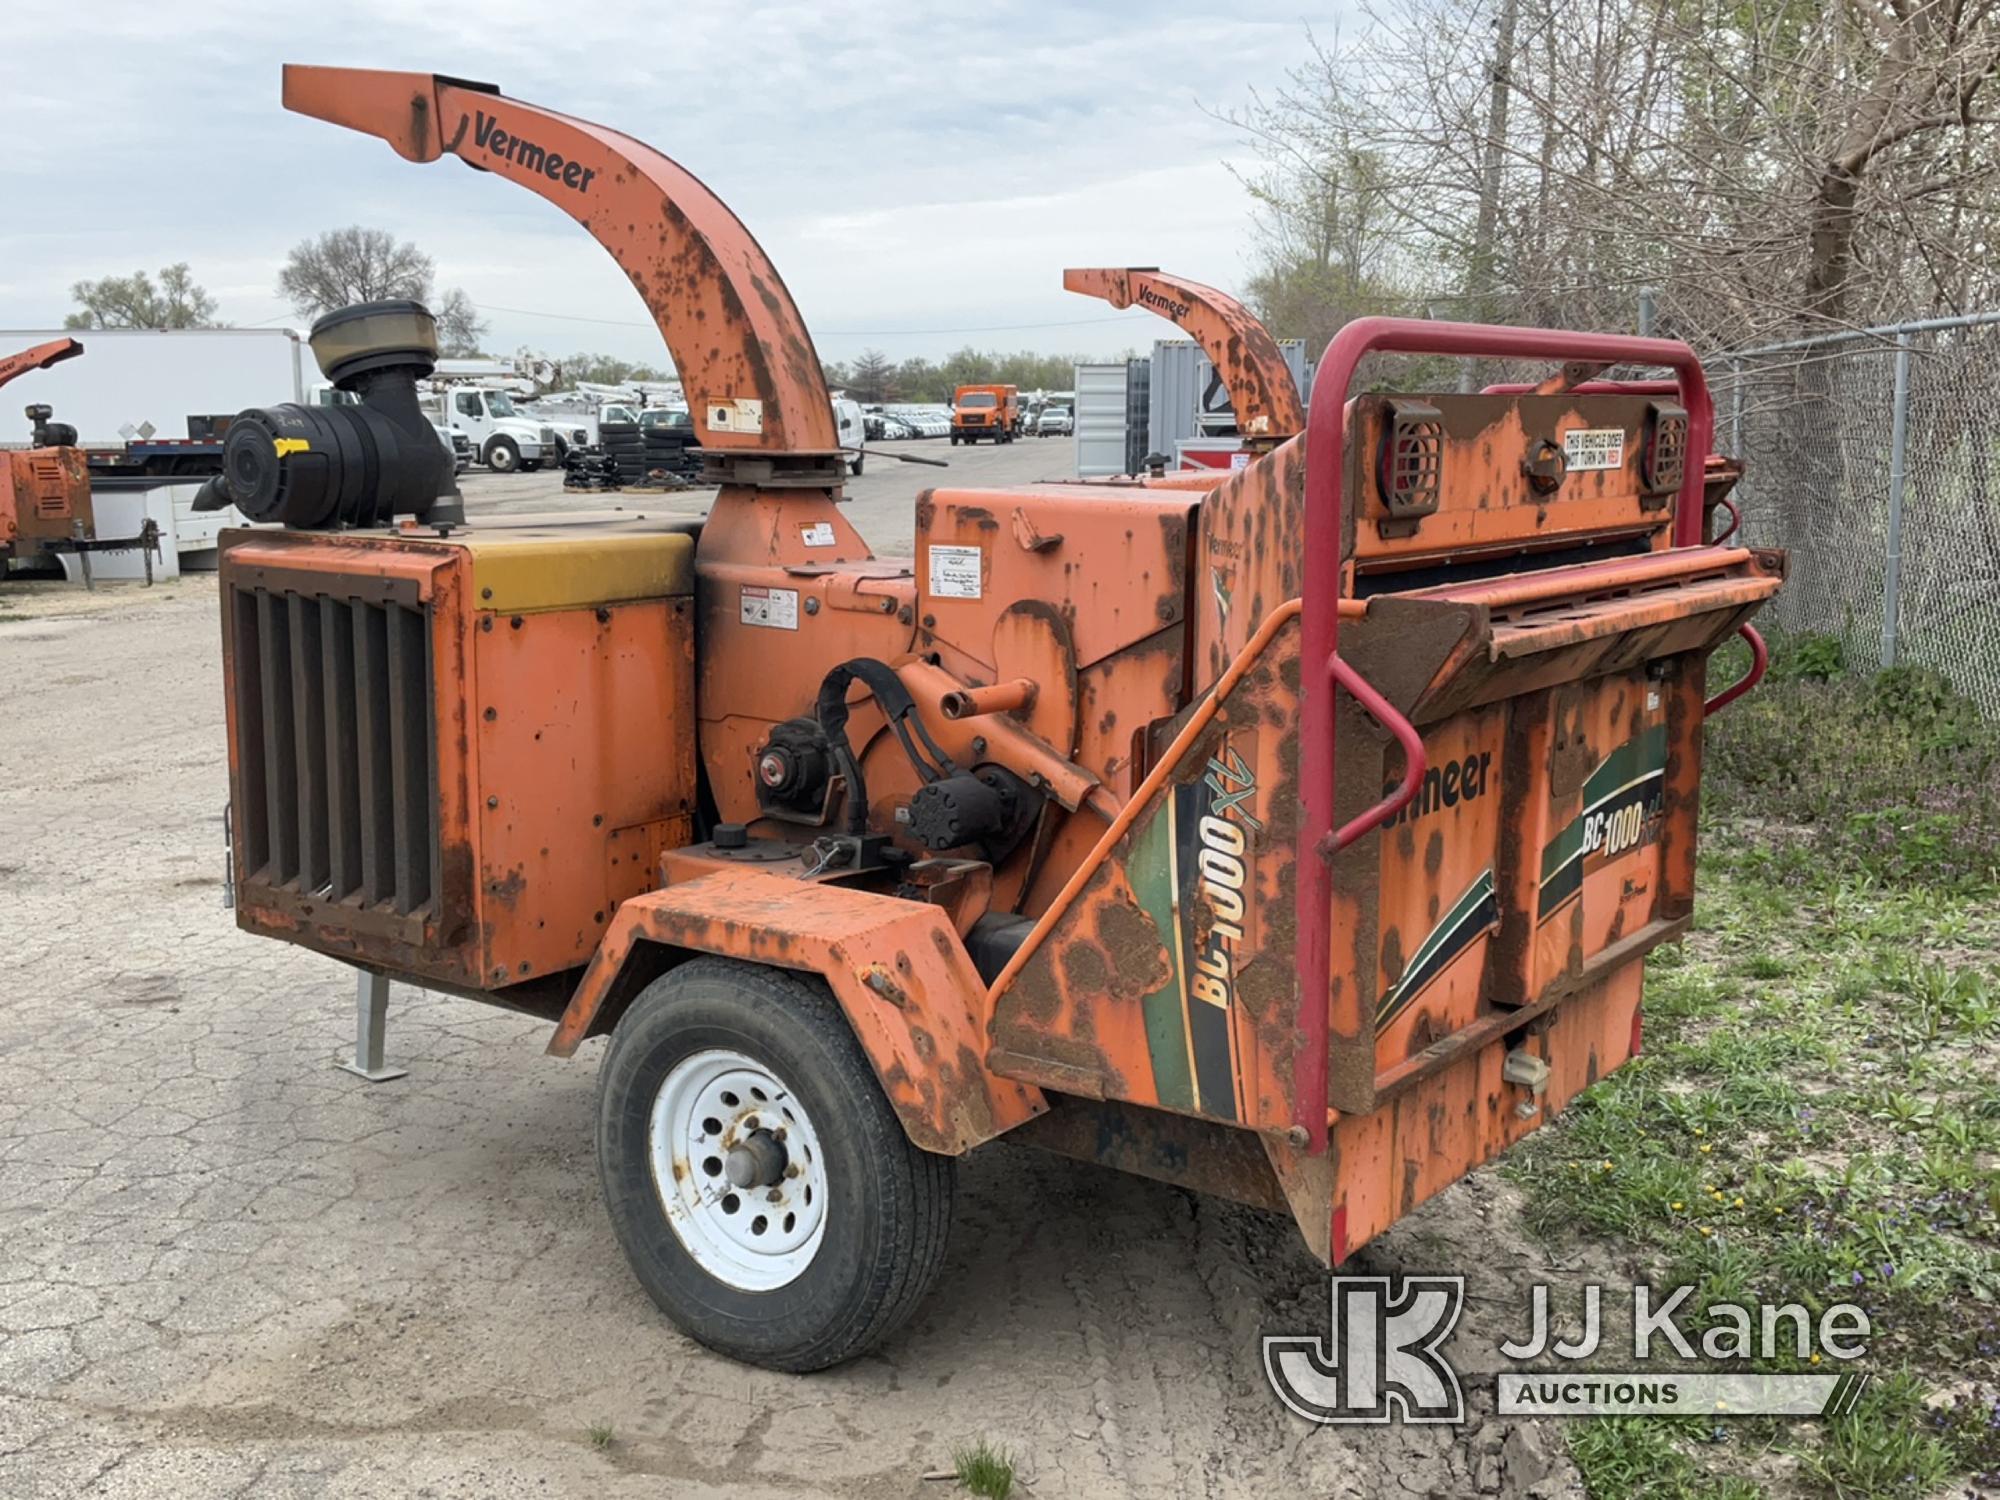 (South Beloit, IL) 2012 Vermeer BC1000XL Chipper (12in Drum) No Title) (Not Running, Condition Unkno